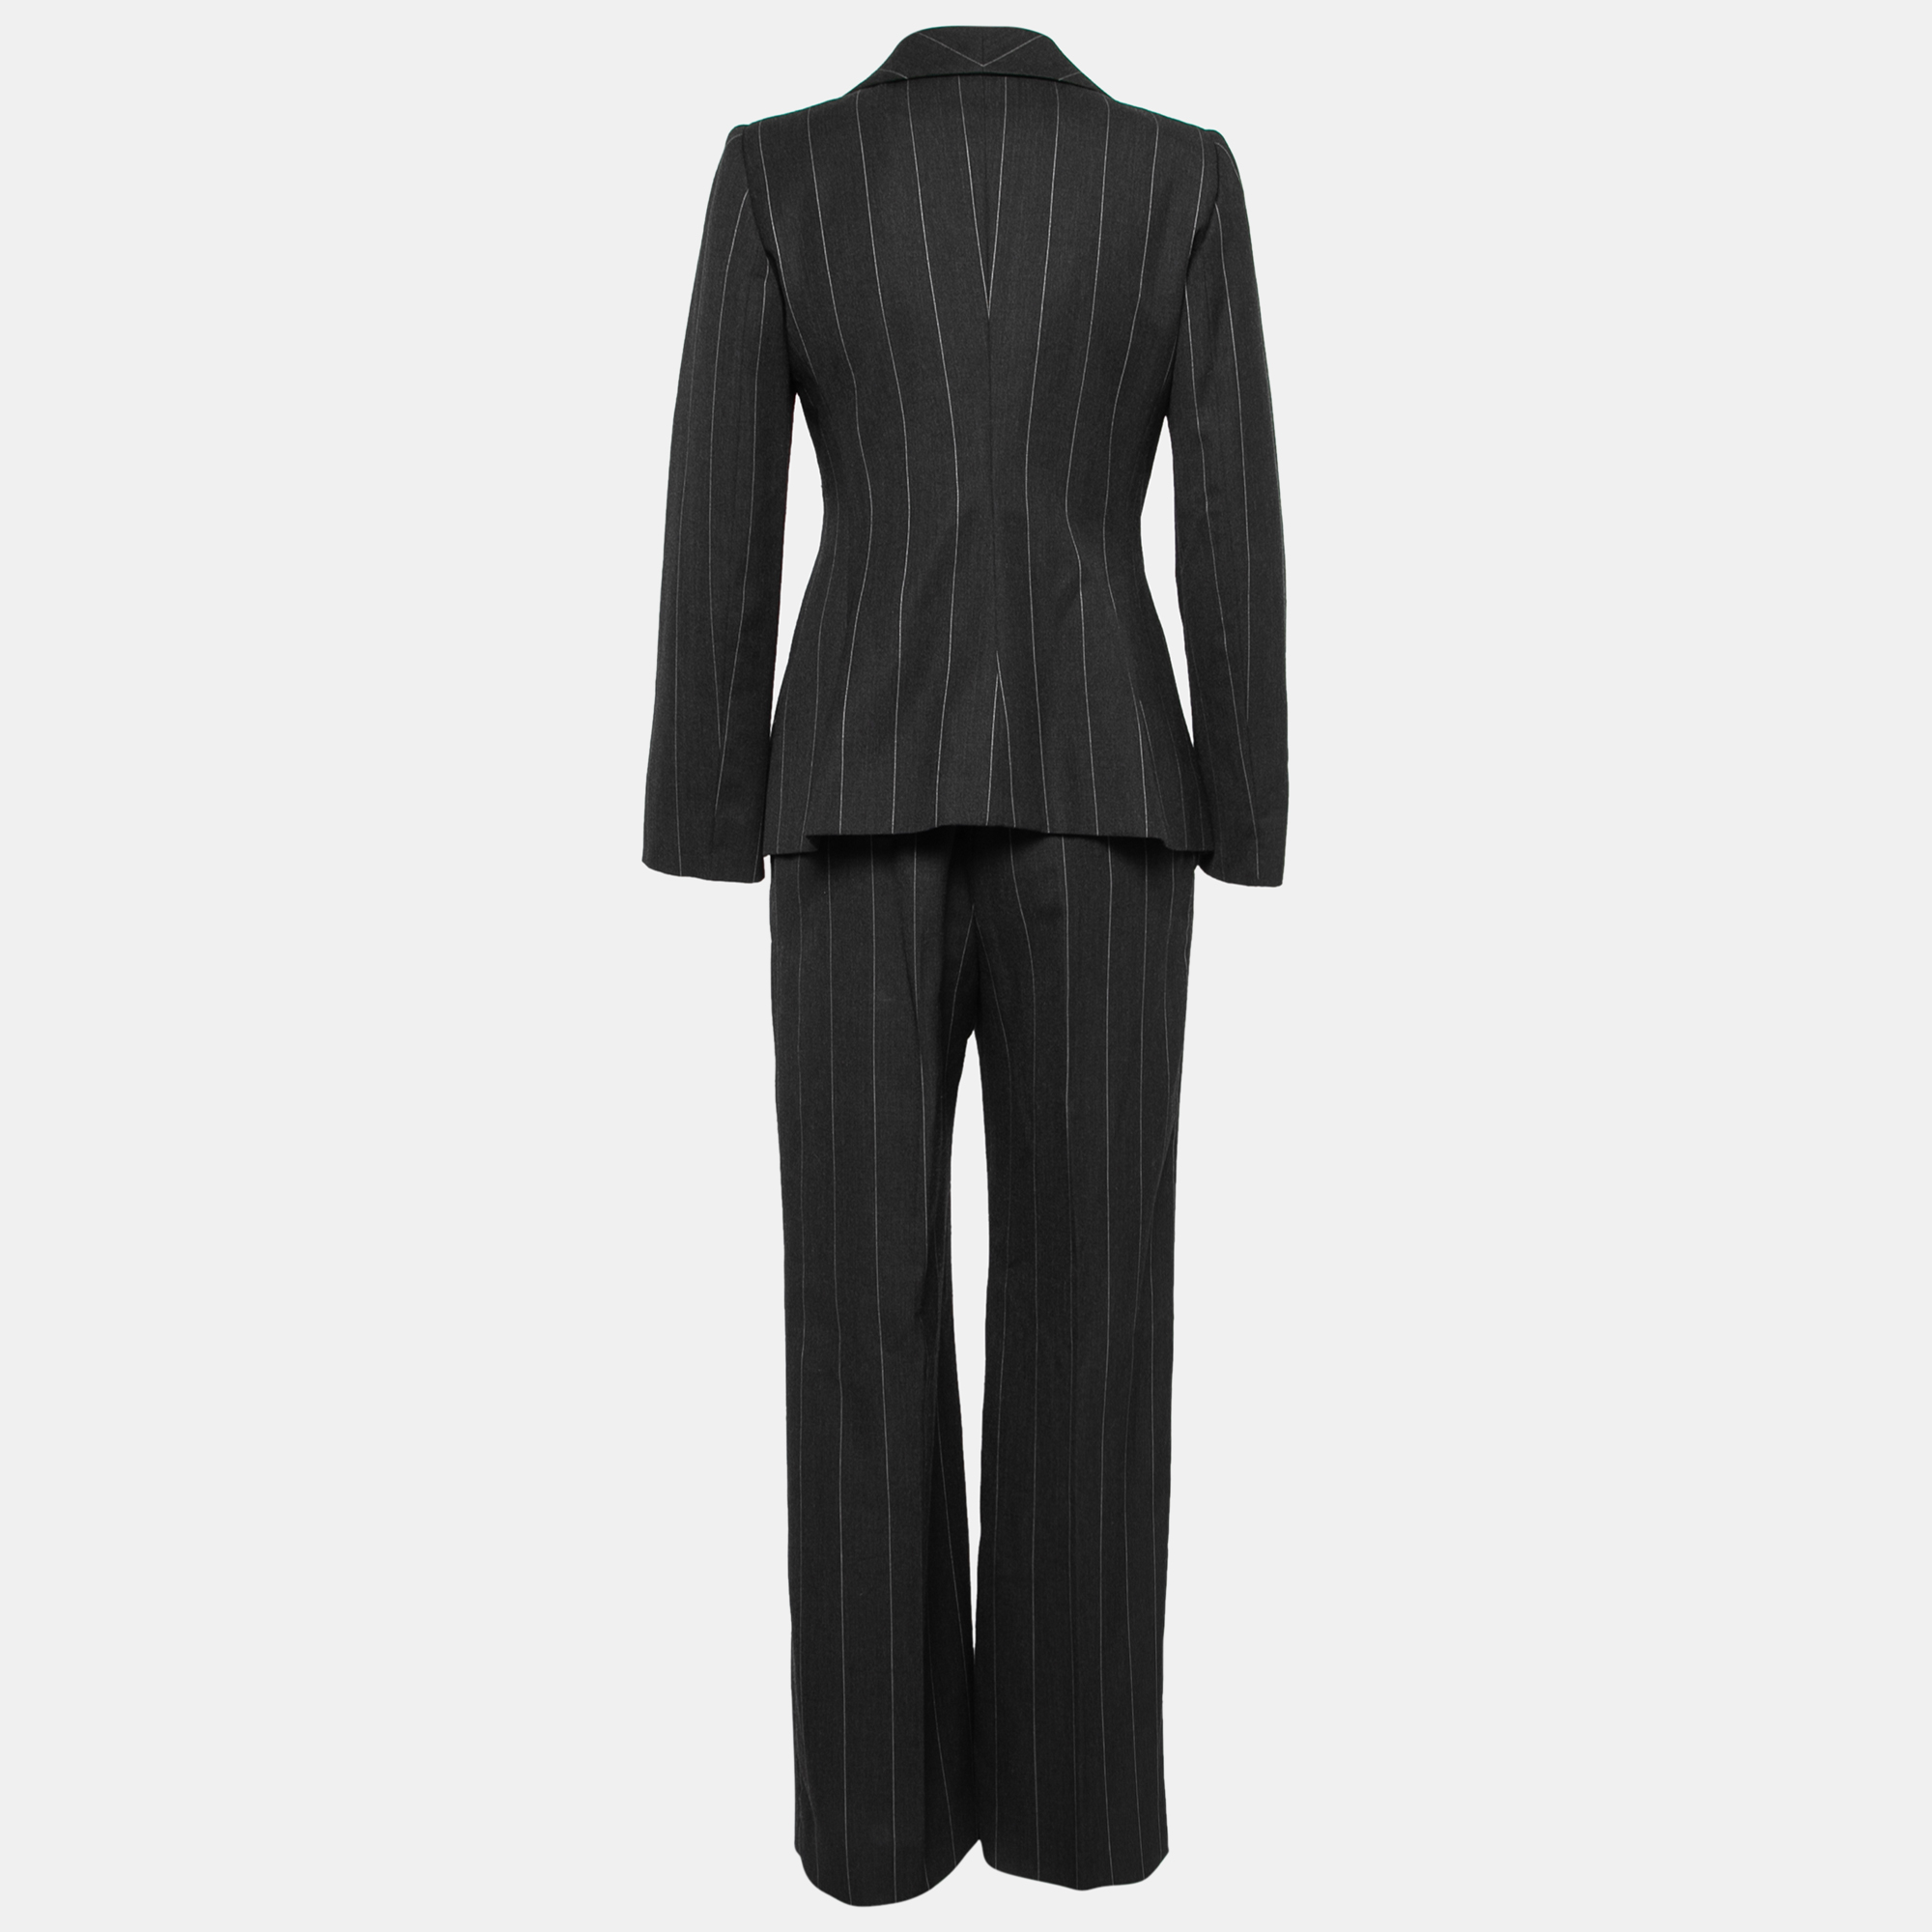 

Armani Collezioni Charcoal Grey Pinstriped Wool Tailored Suit